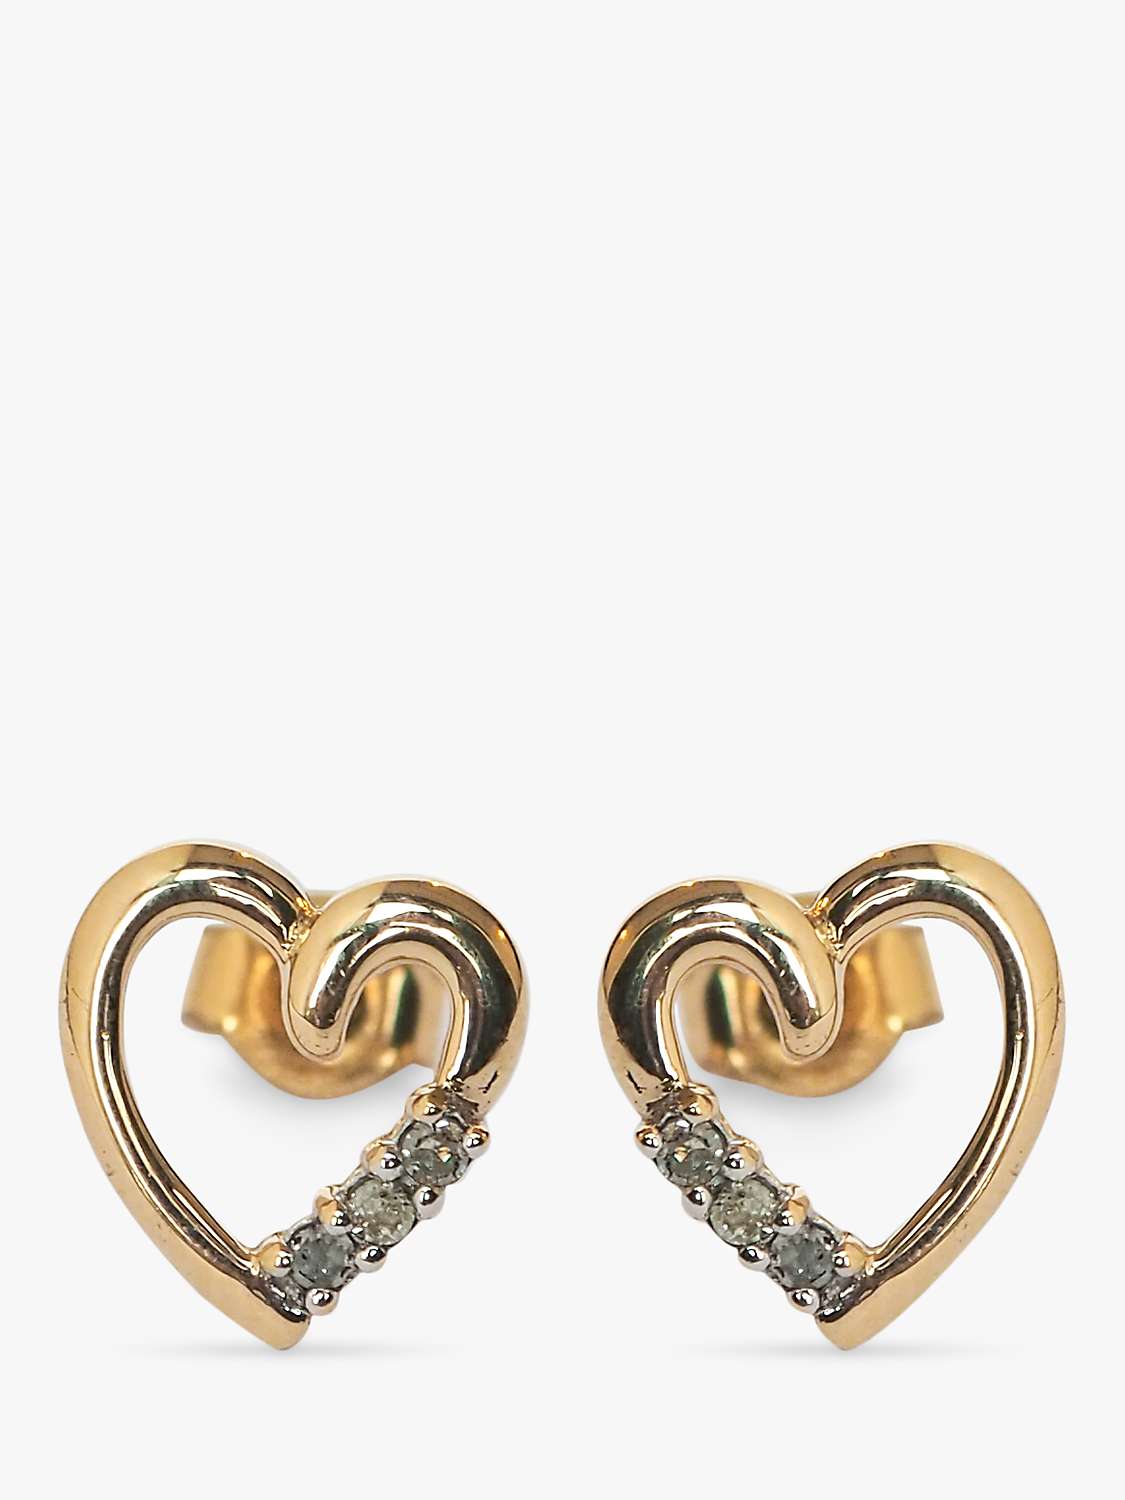 Buy L & T Heirlooms Second Hand 9ct Yellow Gold Diamond Heart Stud Earrings, Gold Online at johnlewis.com